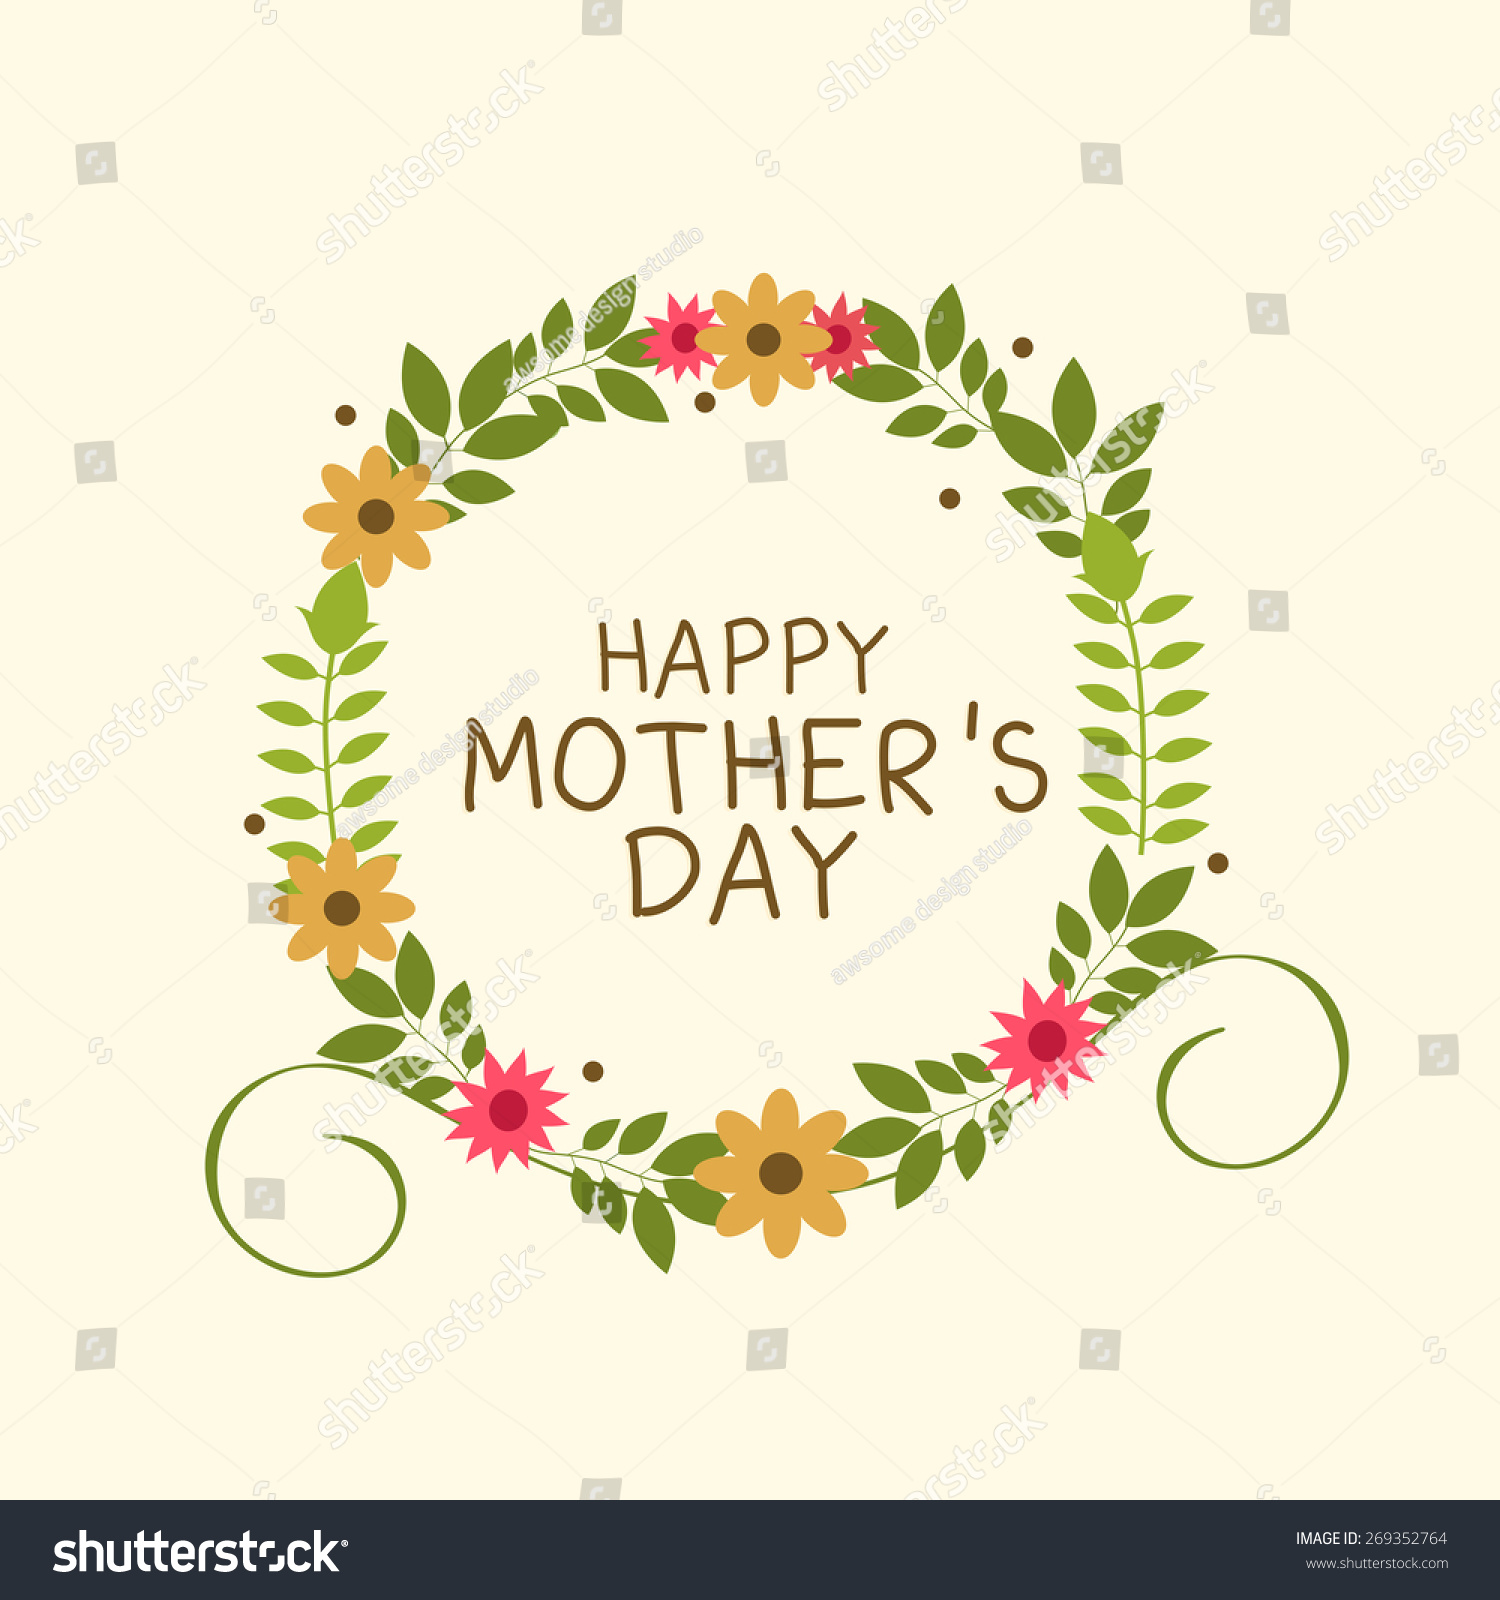 a card happy mother's day. #269352764